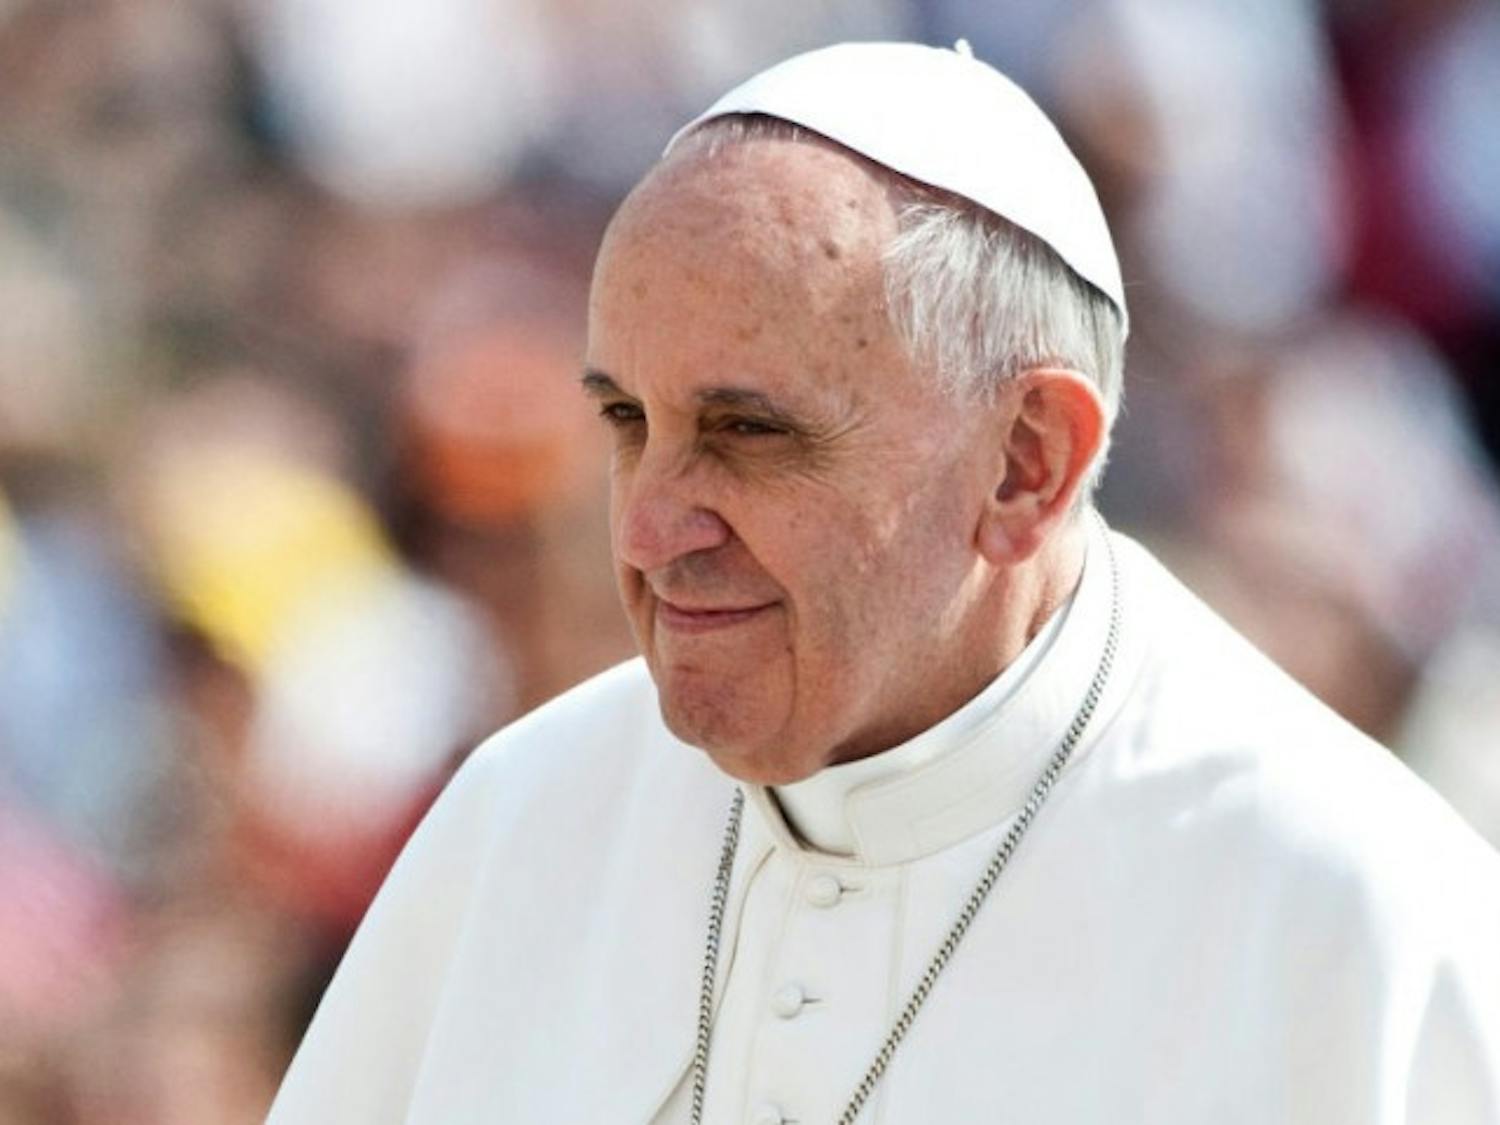 Does Pope Francis’ prominence merit such extreme security measures on his trip to the U.S.?